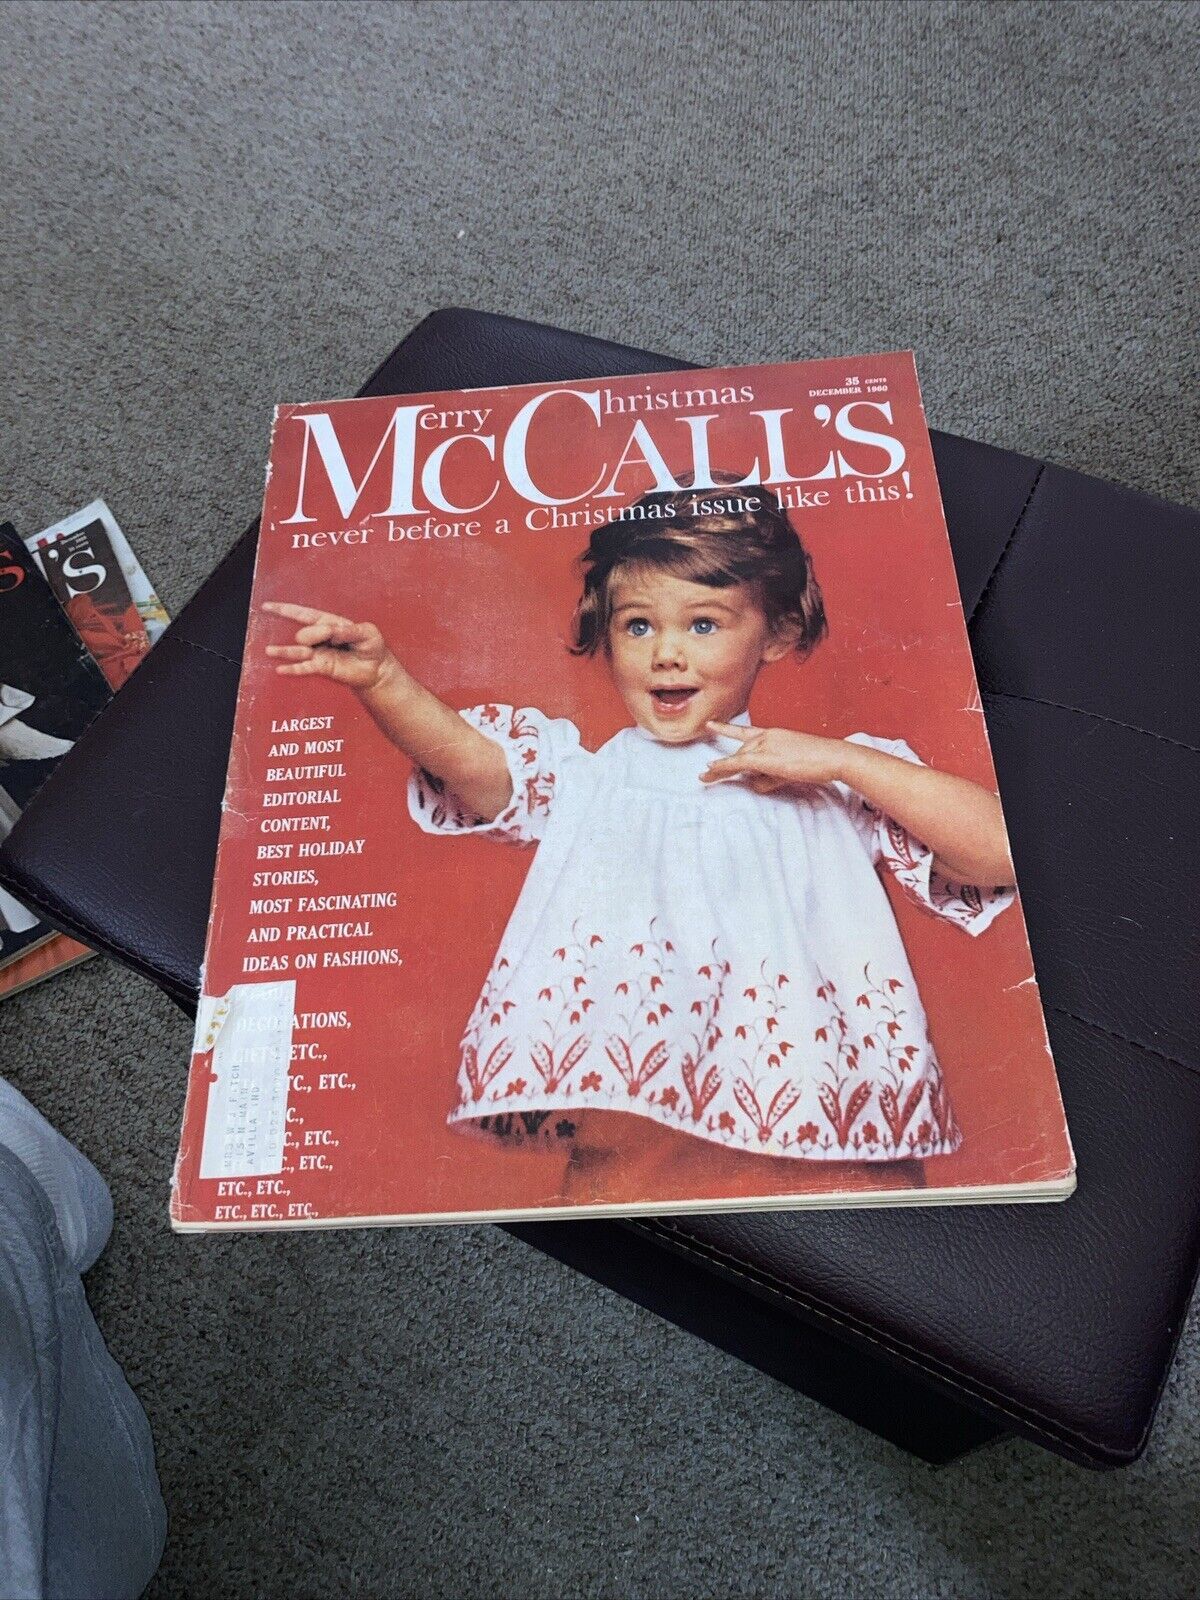 Primary image for Vintage McCall's Magazine December 1960 Merry Christmas Edition Child Cover